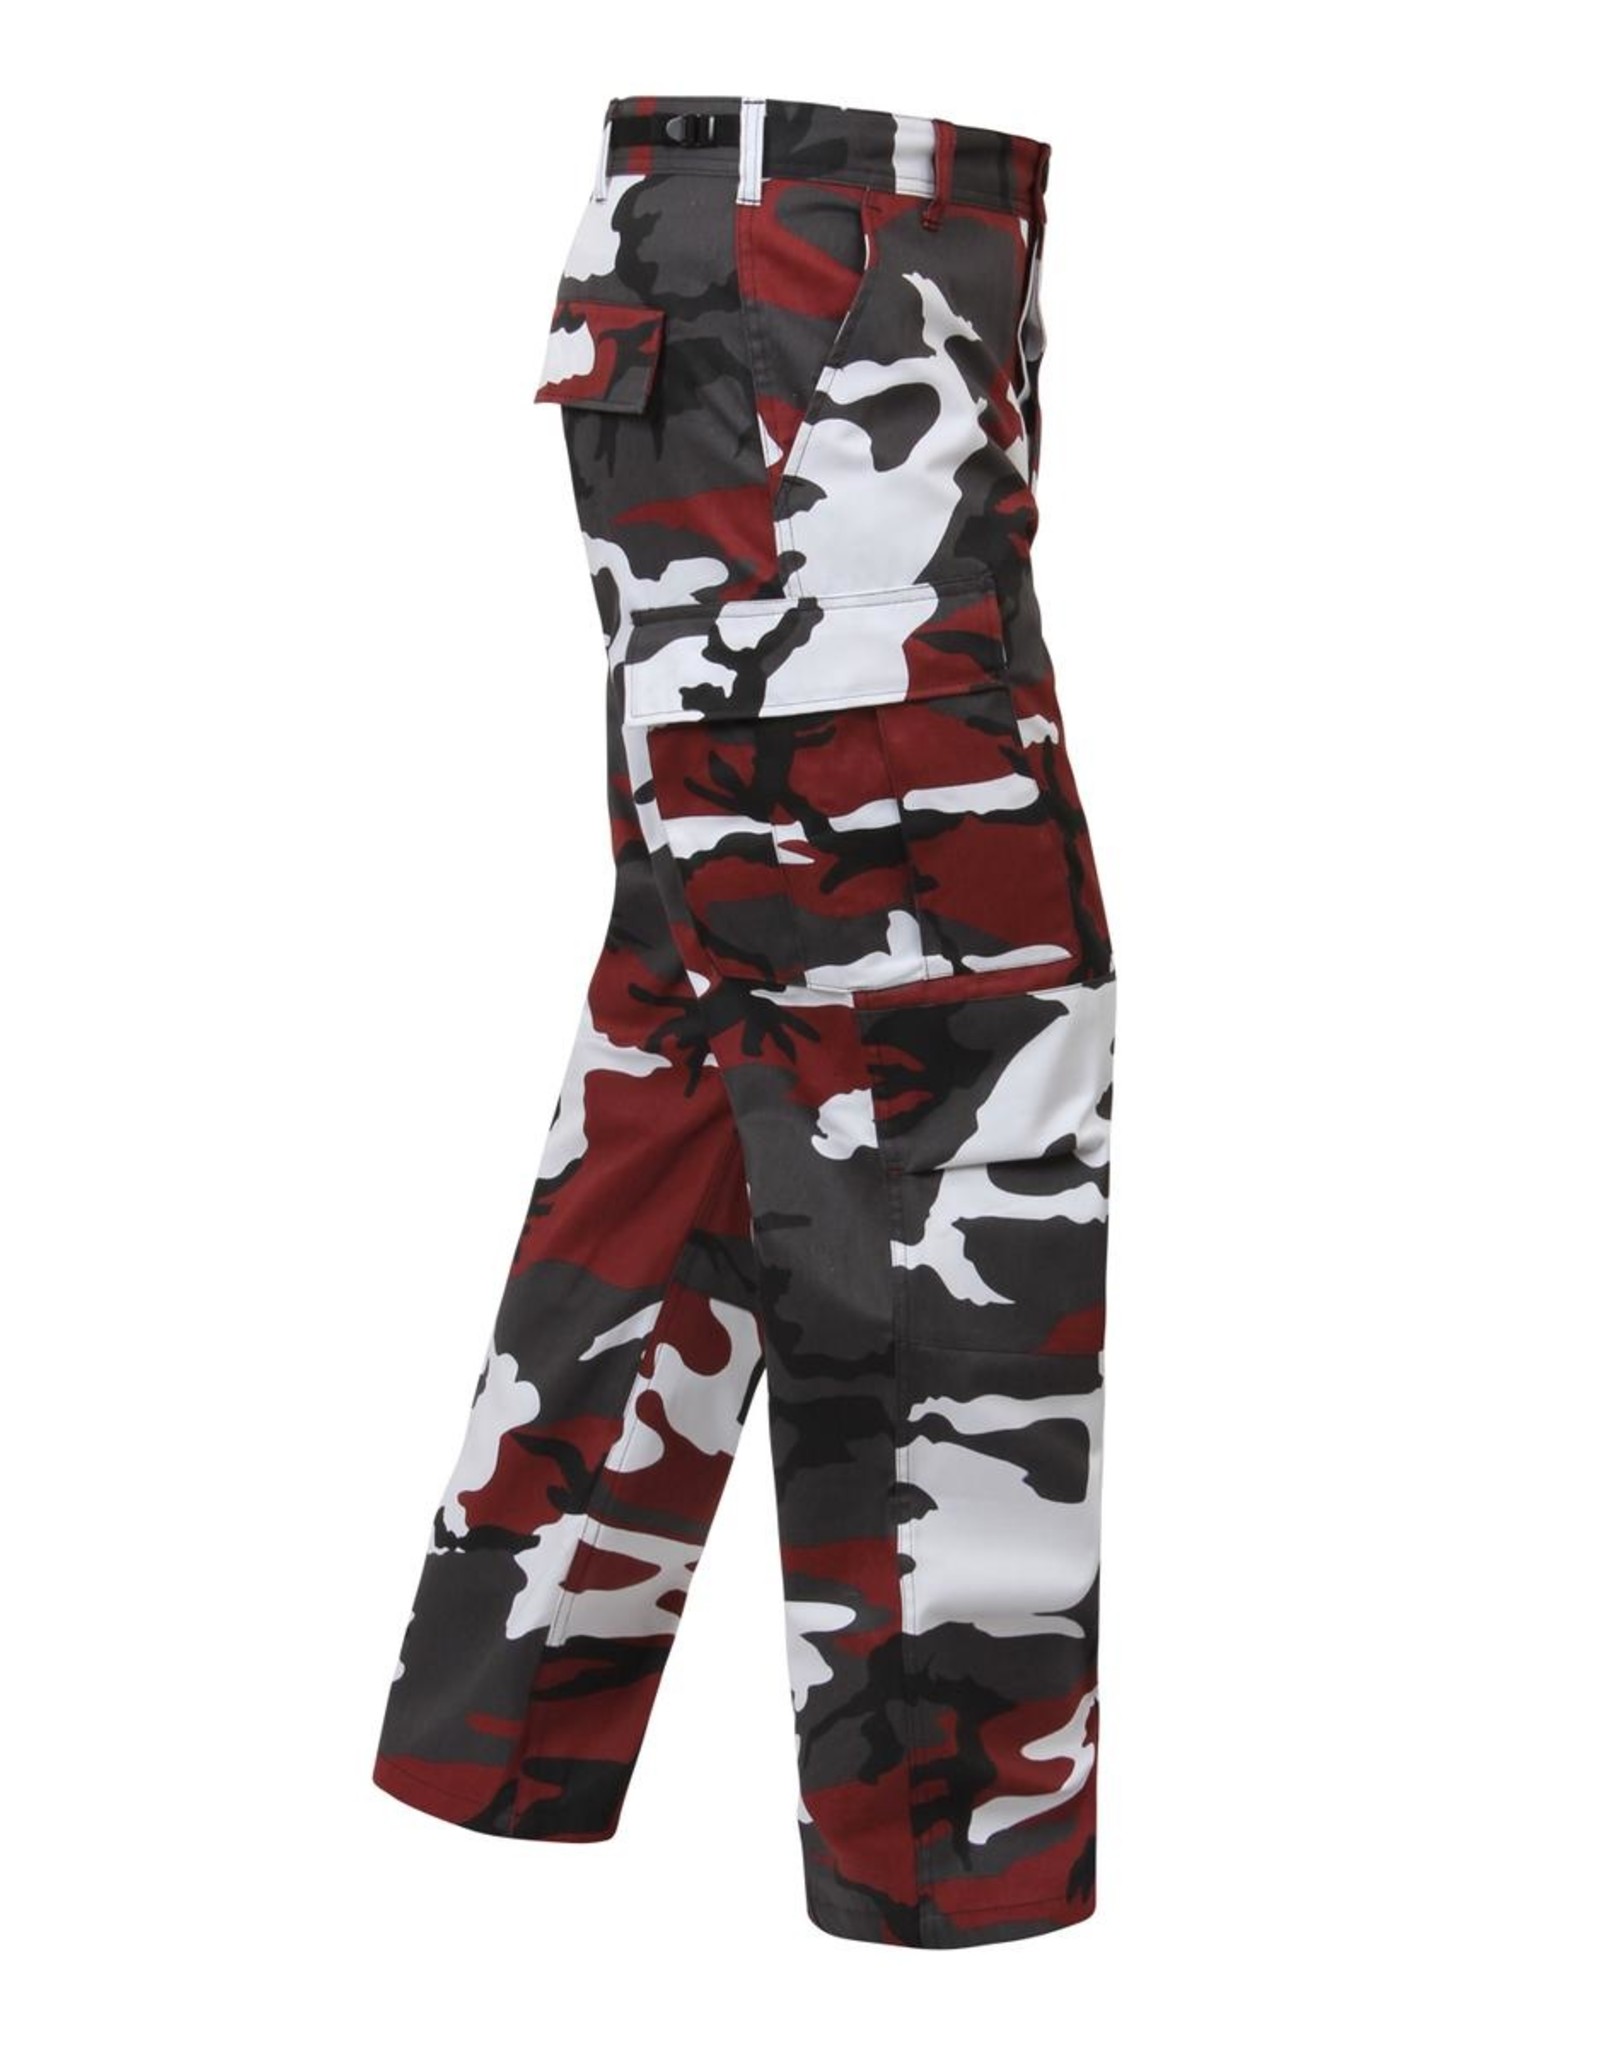 Rothco Red Camo Pants Size L - Men's Clothing & Shoes - Sydney